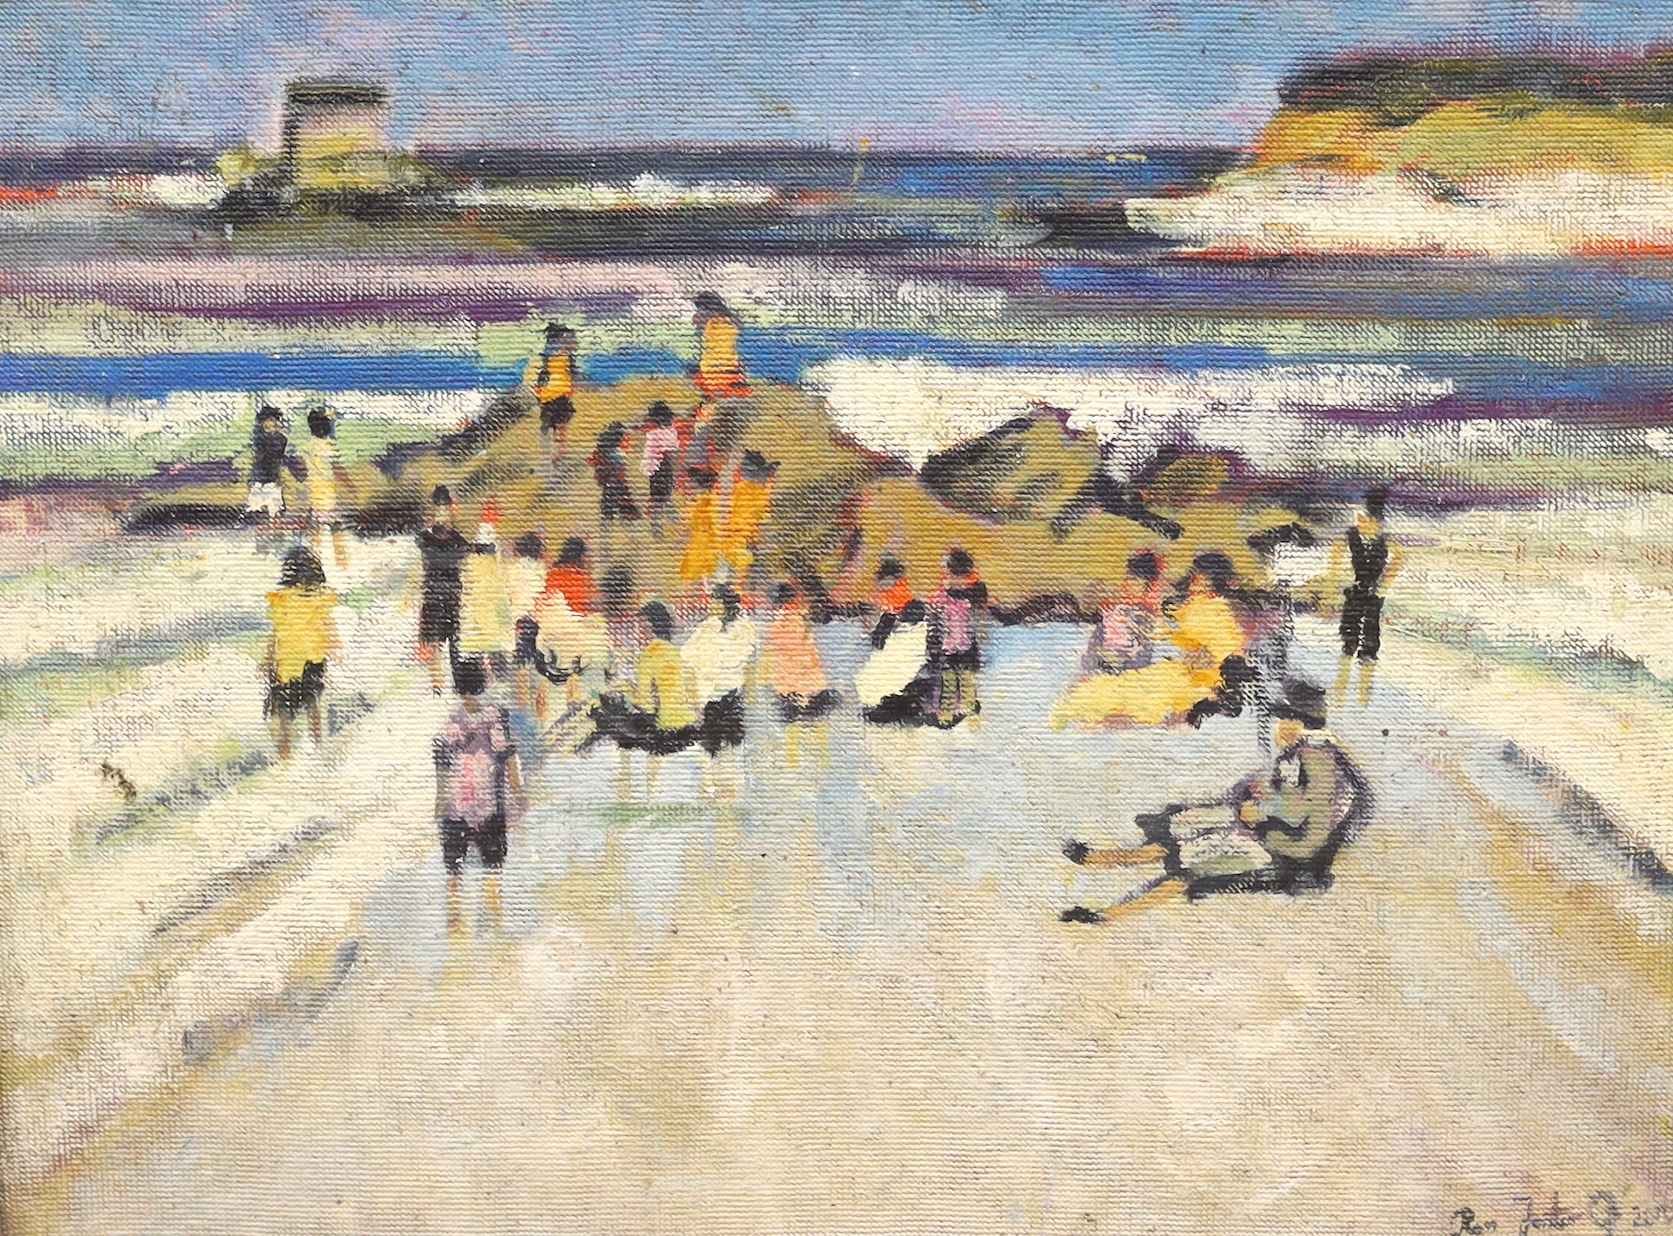 Ross Foster (Contemporary), Impressionist oil on canvas board, Beach scene with figures, signed